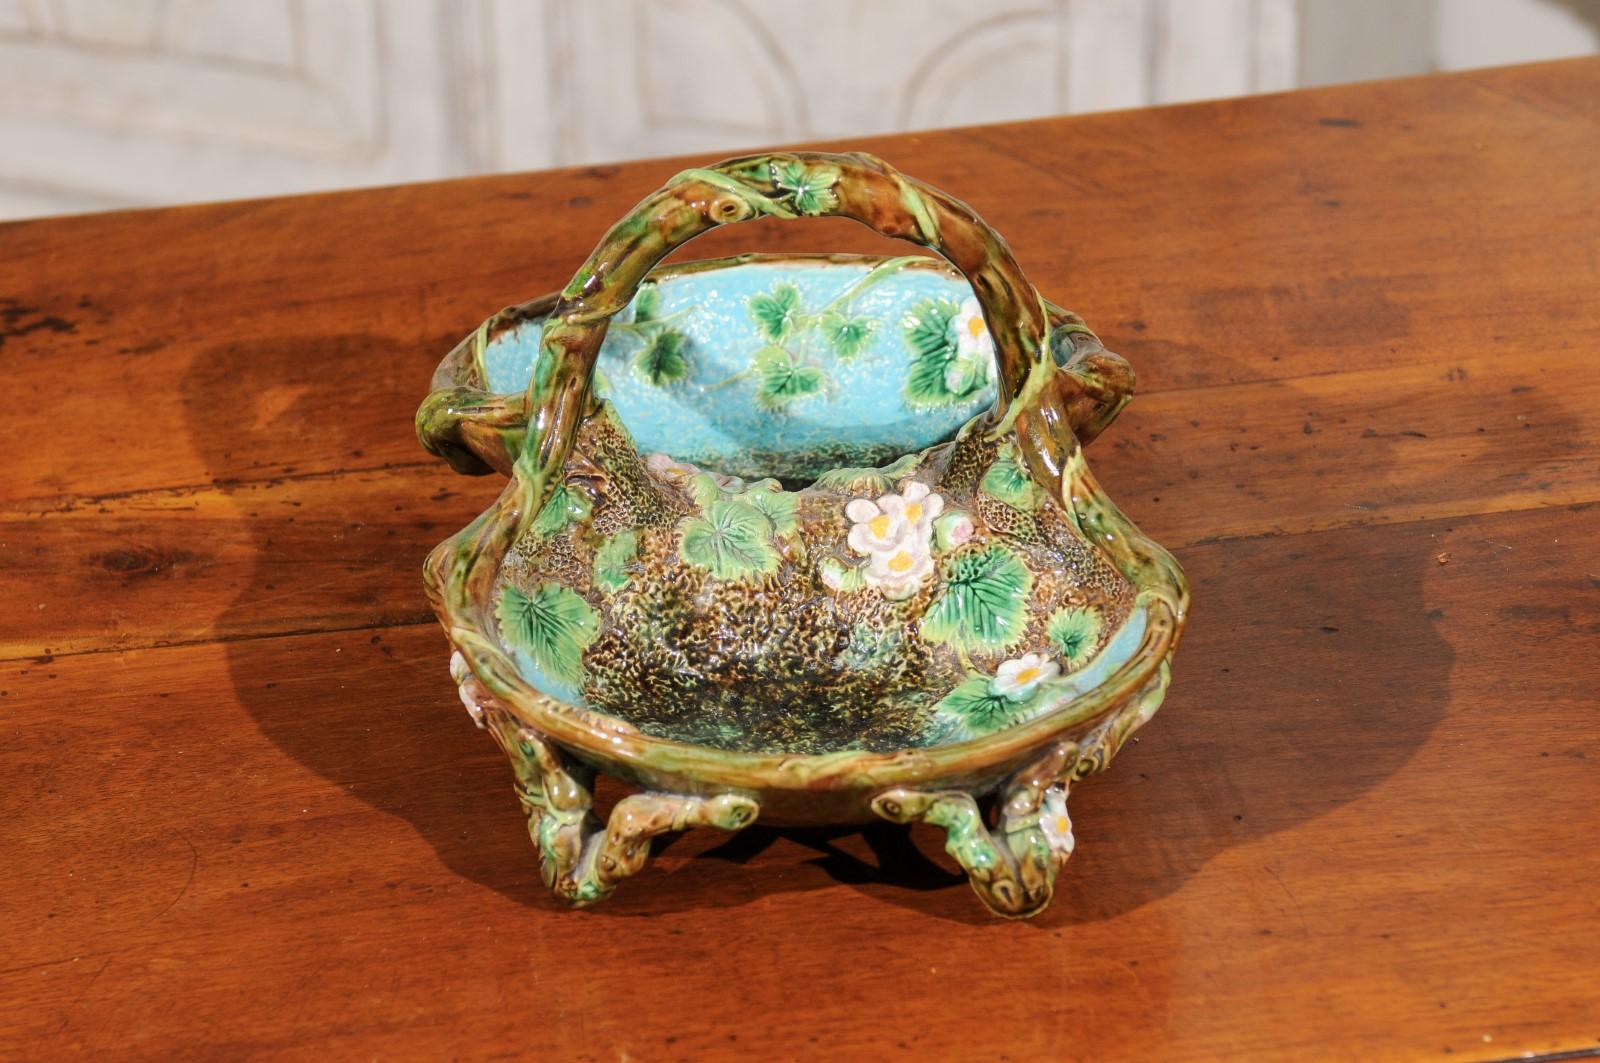 An English mottled brown, green and turquoise Majolica strawberry basket from the late 19th century, signed George Jones. Born in England during the second half of the 19th century, this exquisite Majolica piece features a lovely palette made of